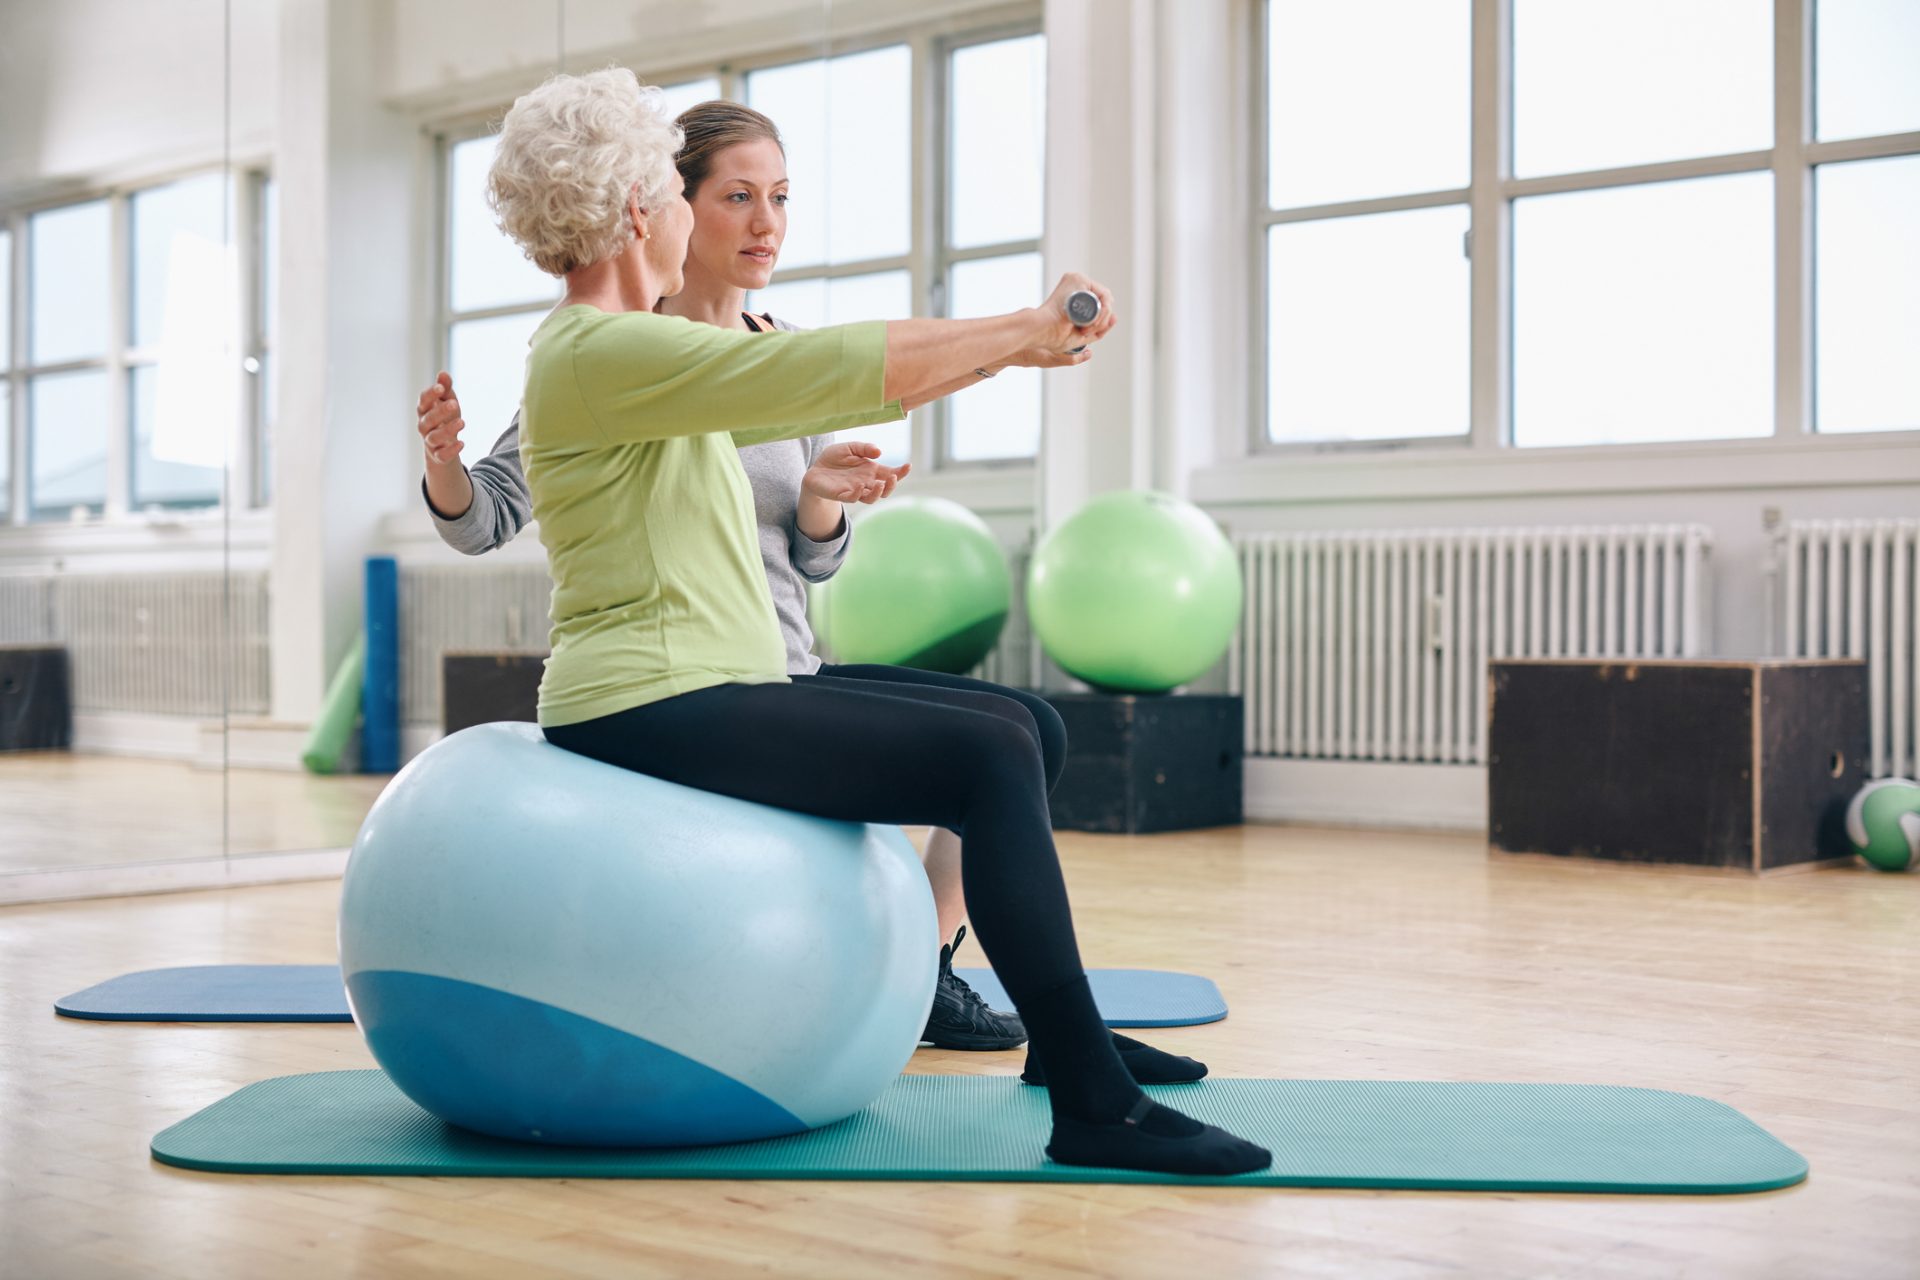 Senior woman exercising with a therapist on a balance ball in a gym with large windows.